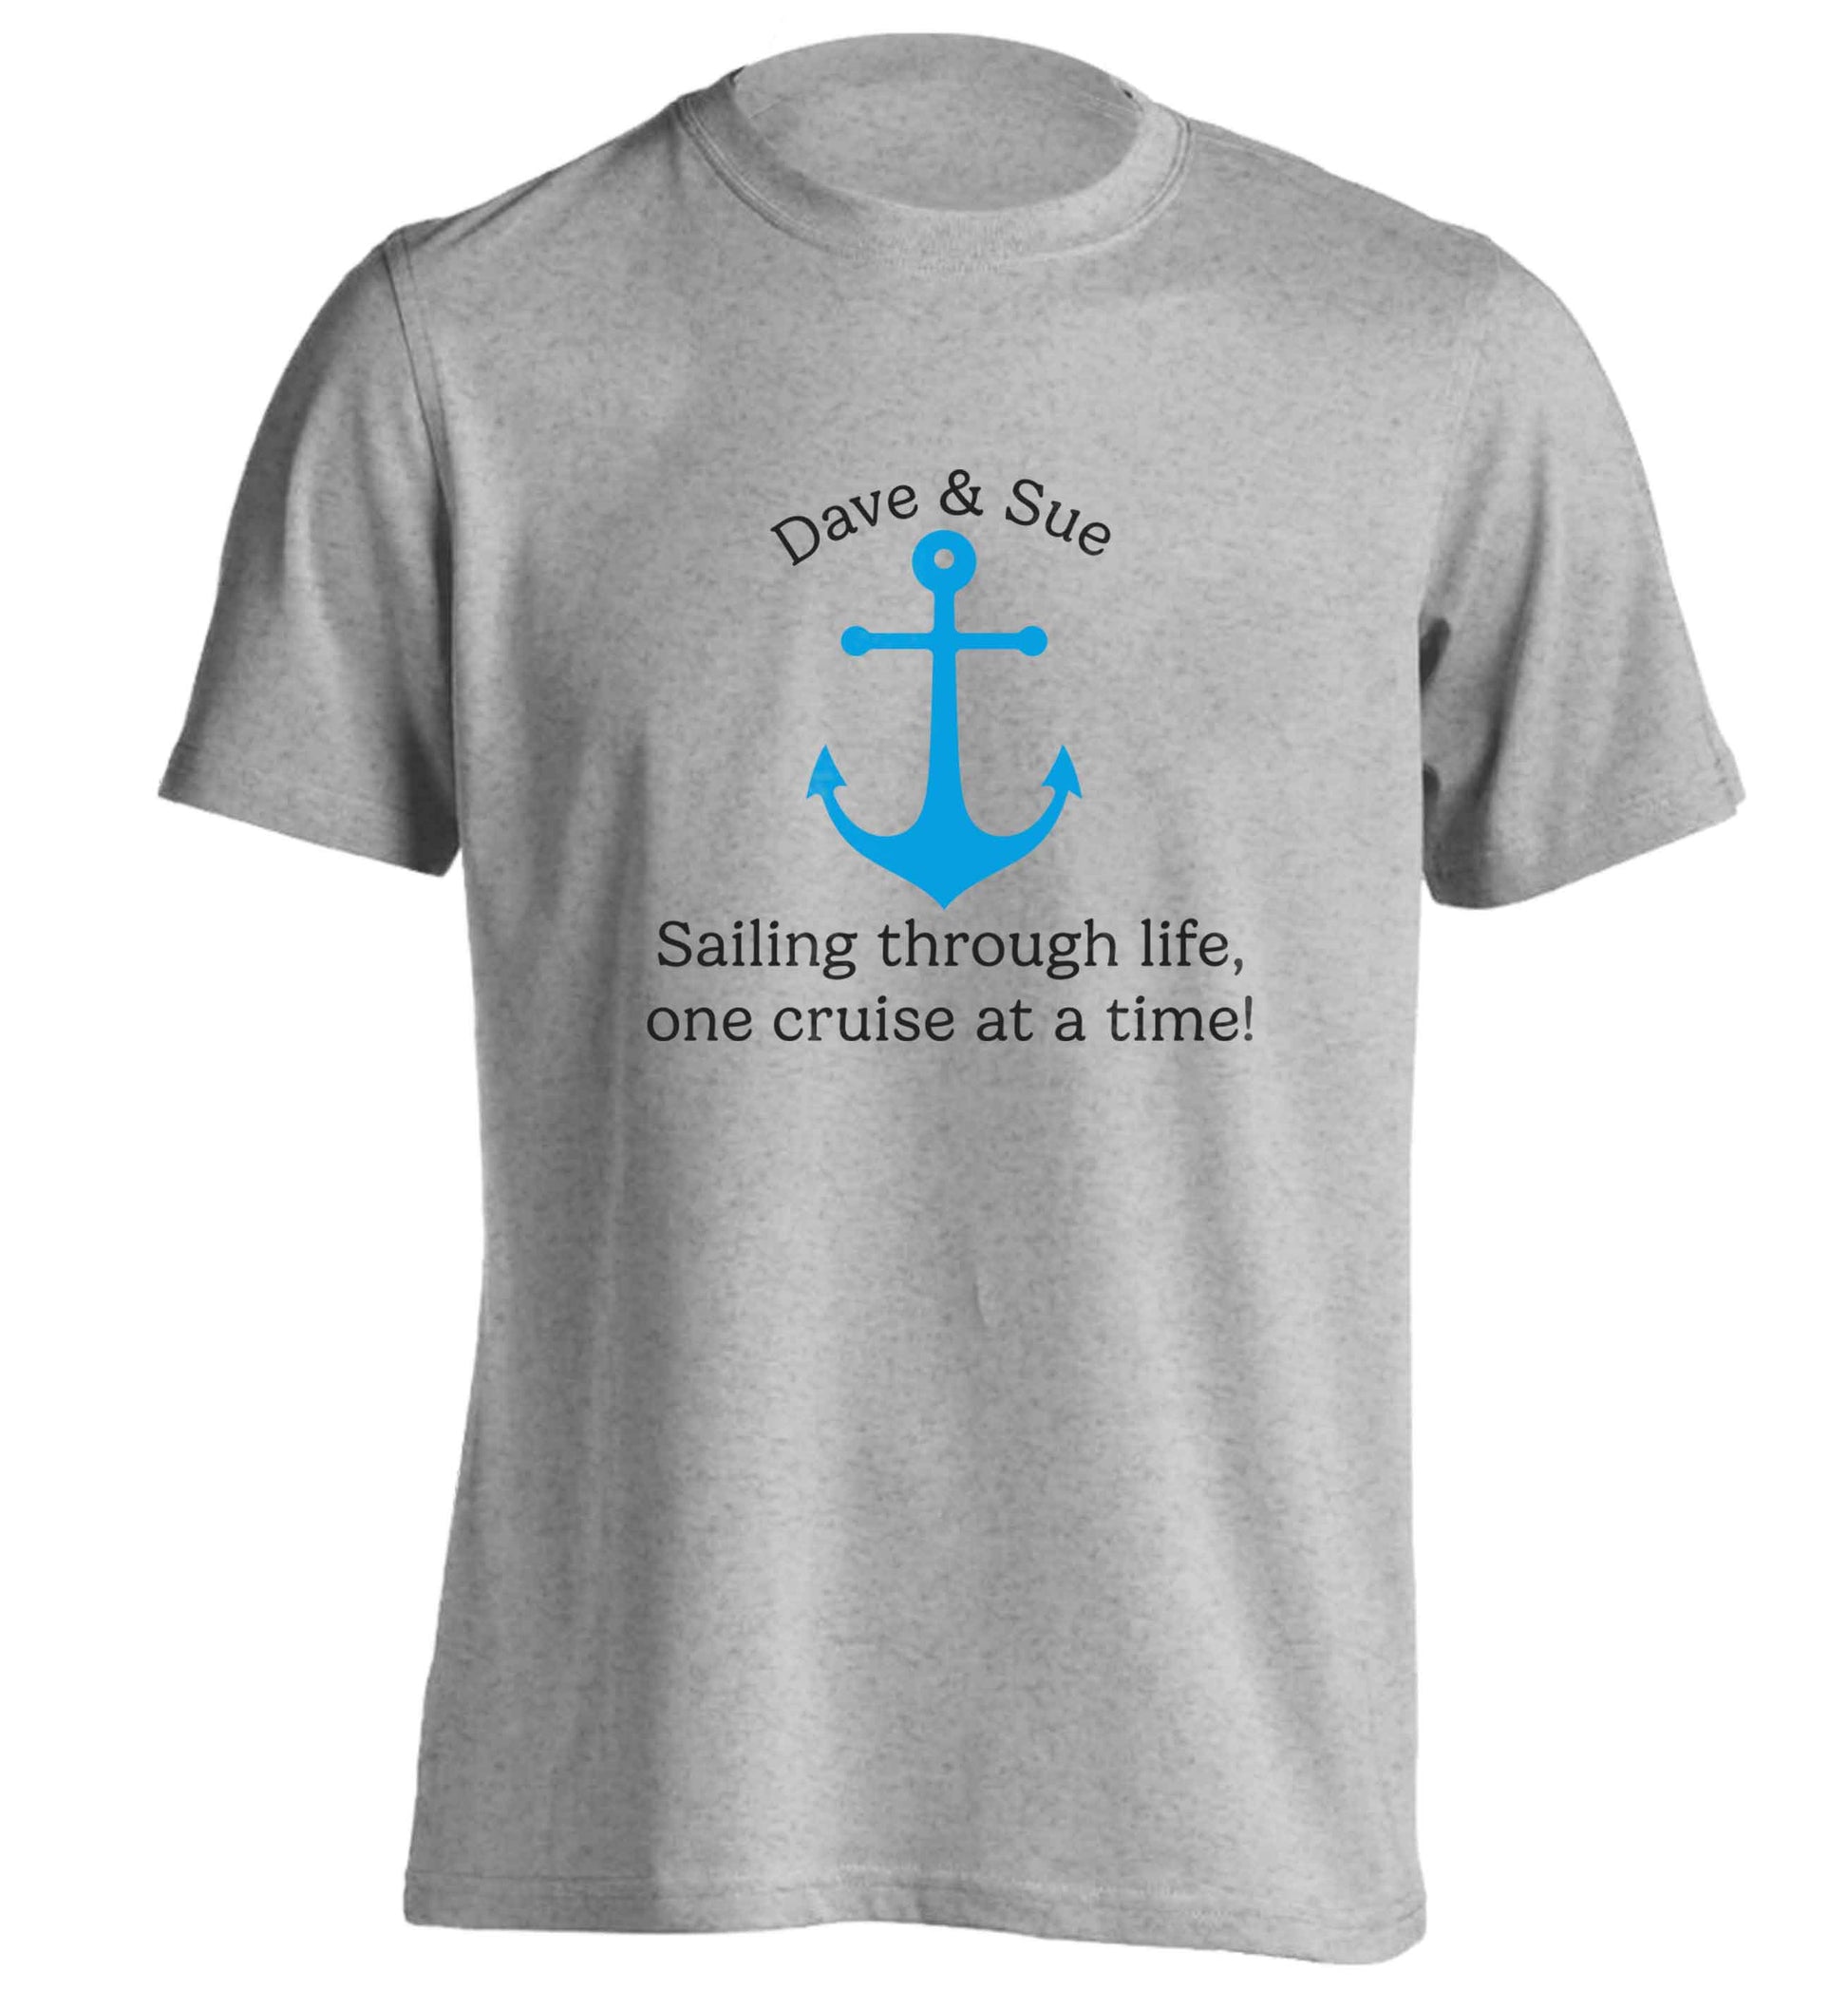 Sailing through life one cruise at a time - personalised adults unisex grey Tshirt 2XL